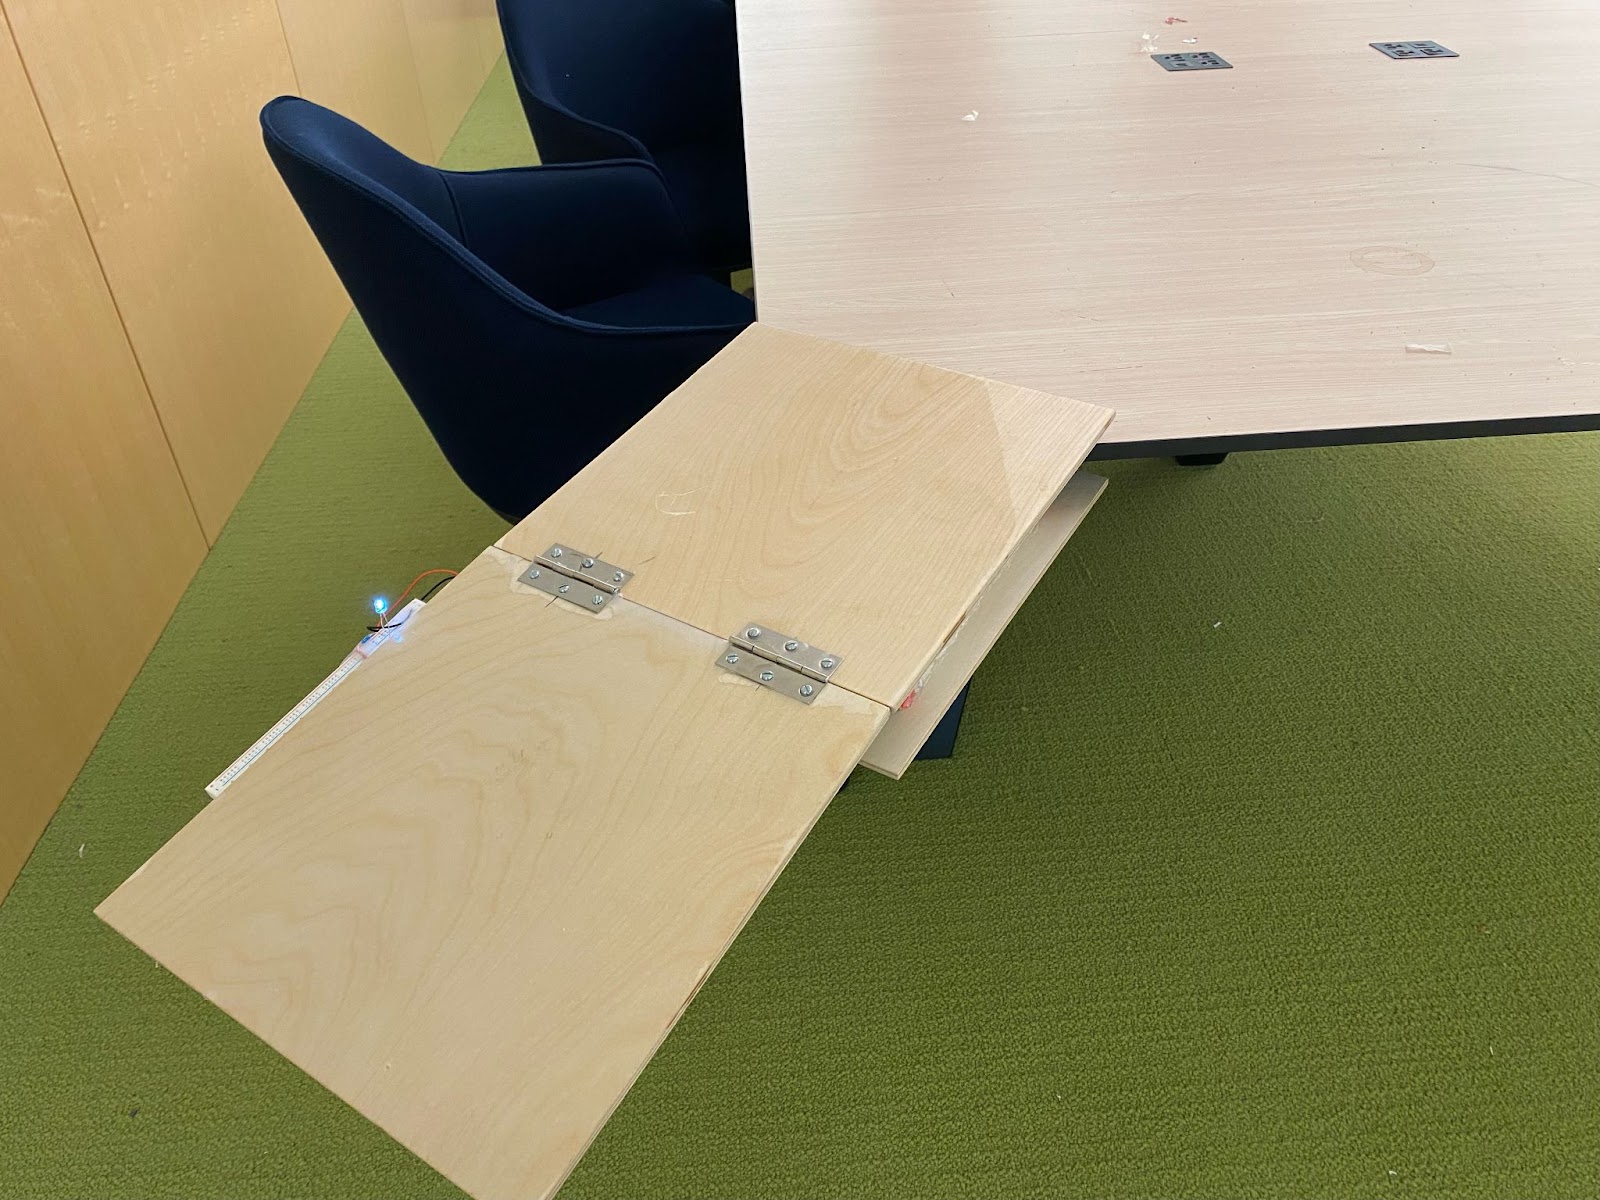 Desk Extender attached to light wood desk on green carpet near navy blue chairs.